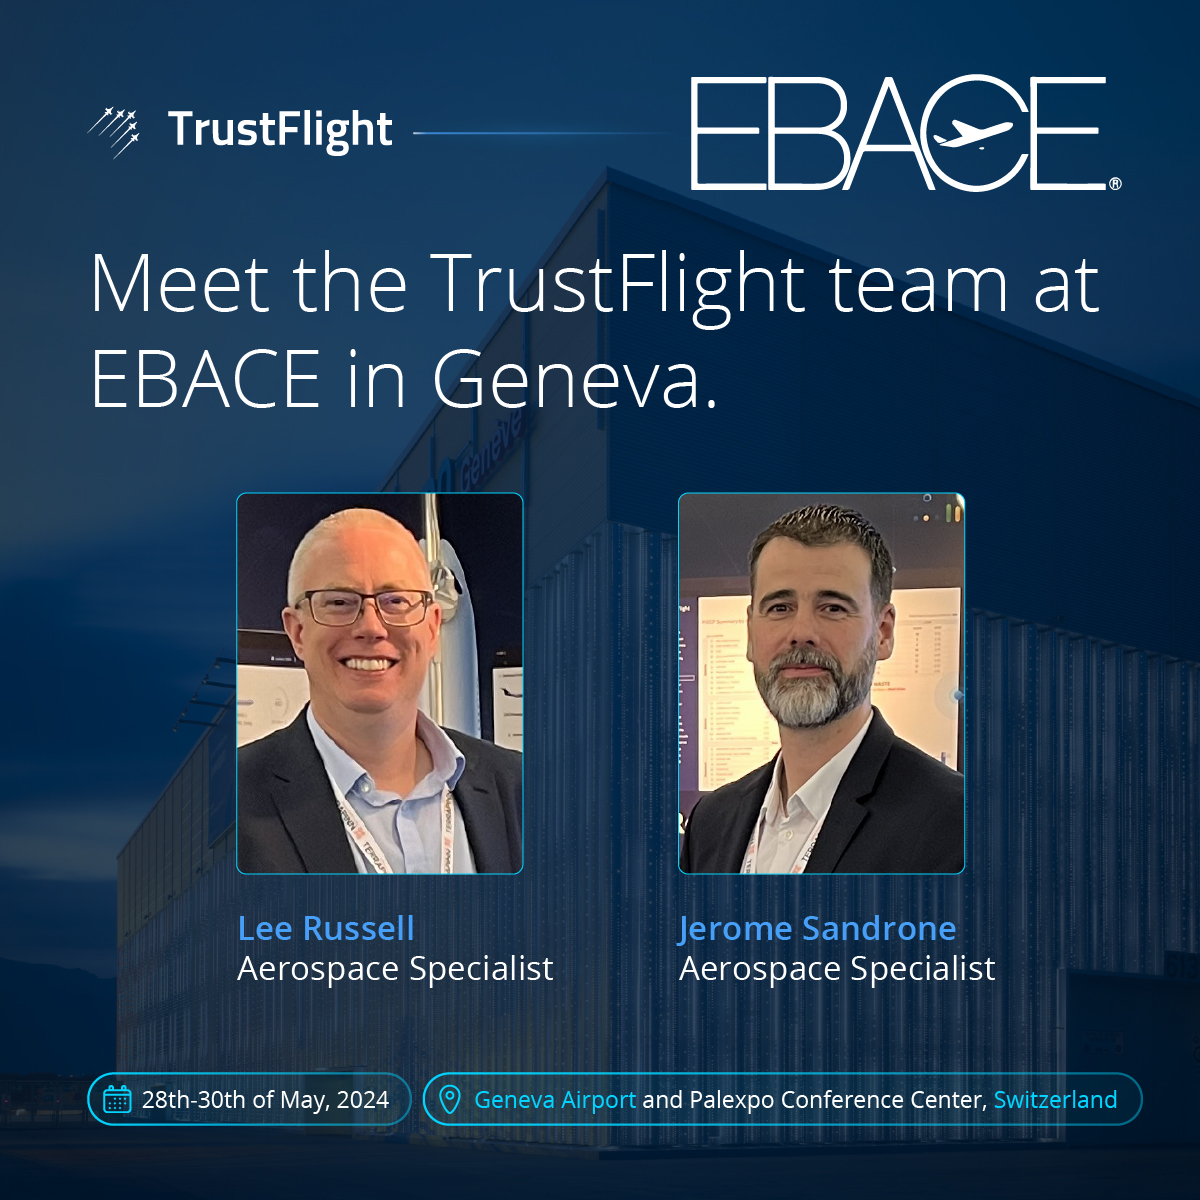 We're counting down the days to #EBACE! We're excited to see you in Geneva. Our team looks forward to connecting with all of our valued partners at the show! 🎉

See you there! 😄 #integratedsafety